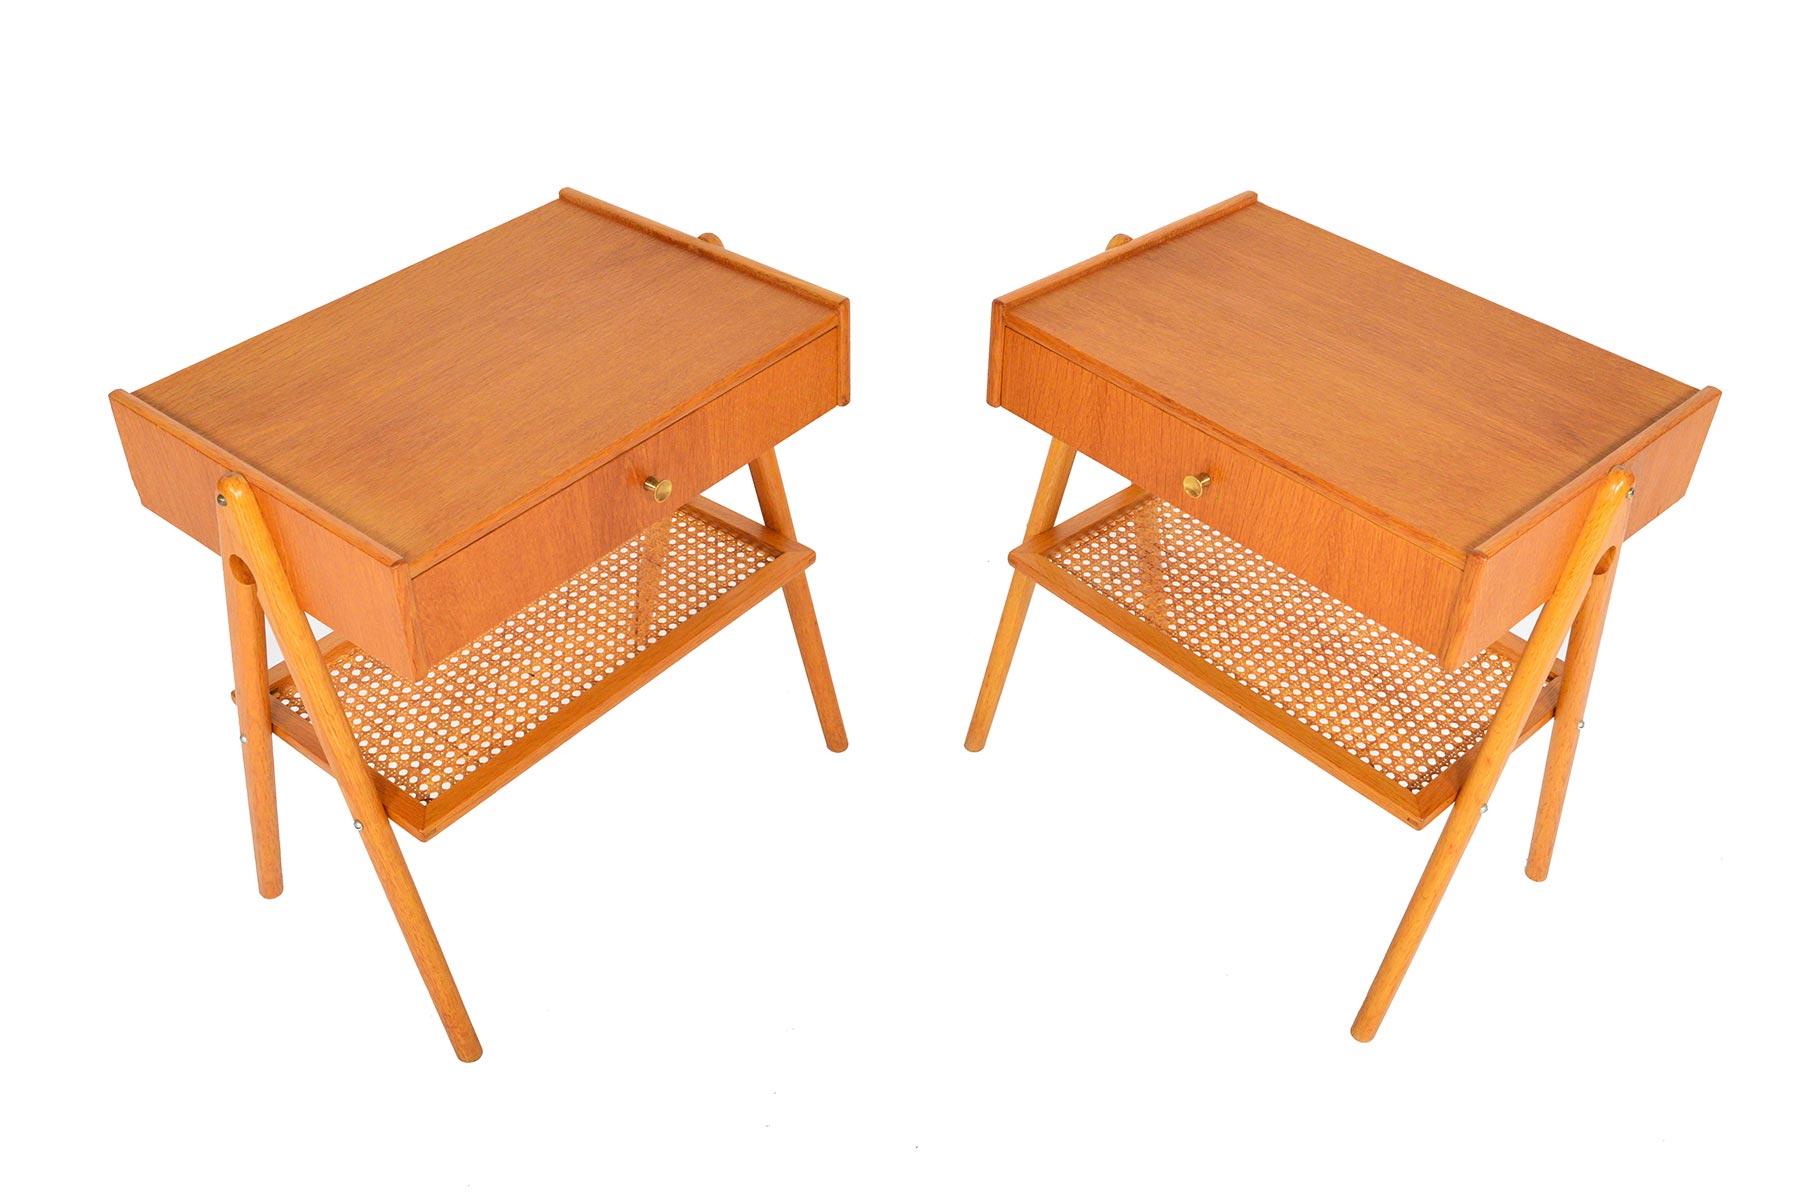 This handsome pair of Swedish modern midcentury nightstands blend form and function seamlessly. A single pullout drawer provides storage for smaller items. A lower rattan shelf provides additional storage. Case stands on oak v-legs. In excellent